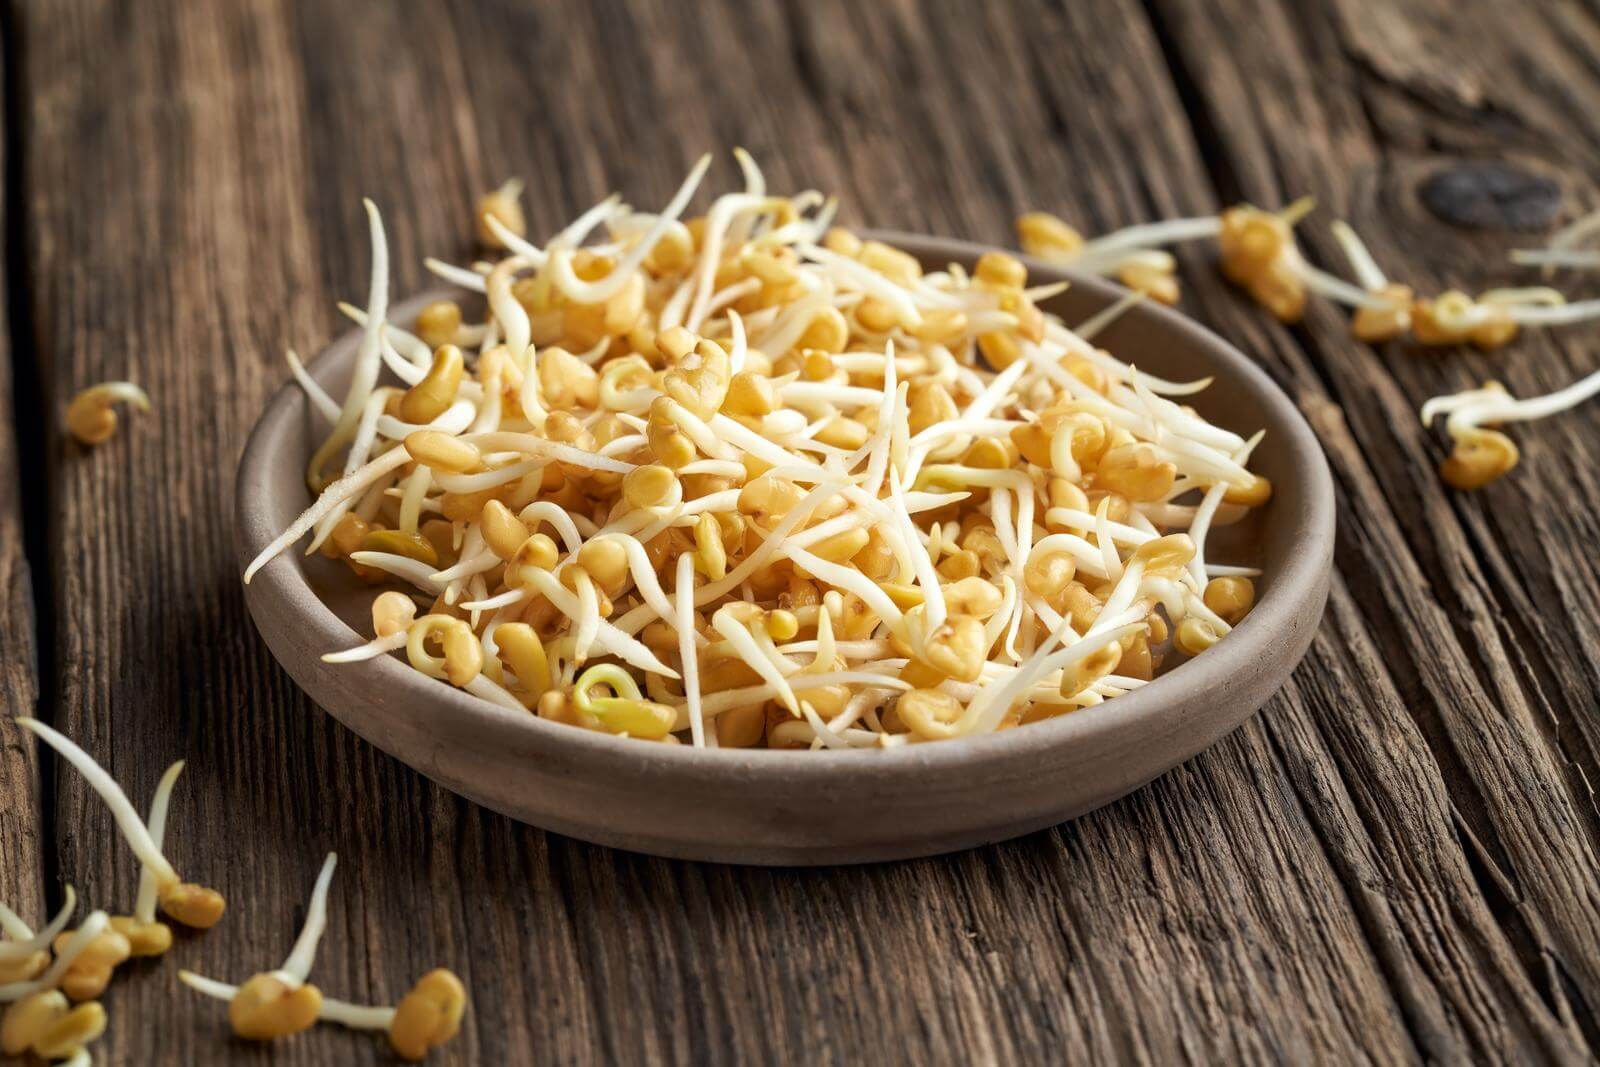 Fenugreek sprouts in a plate on a wooden table.